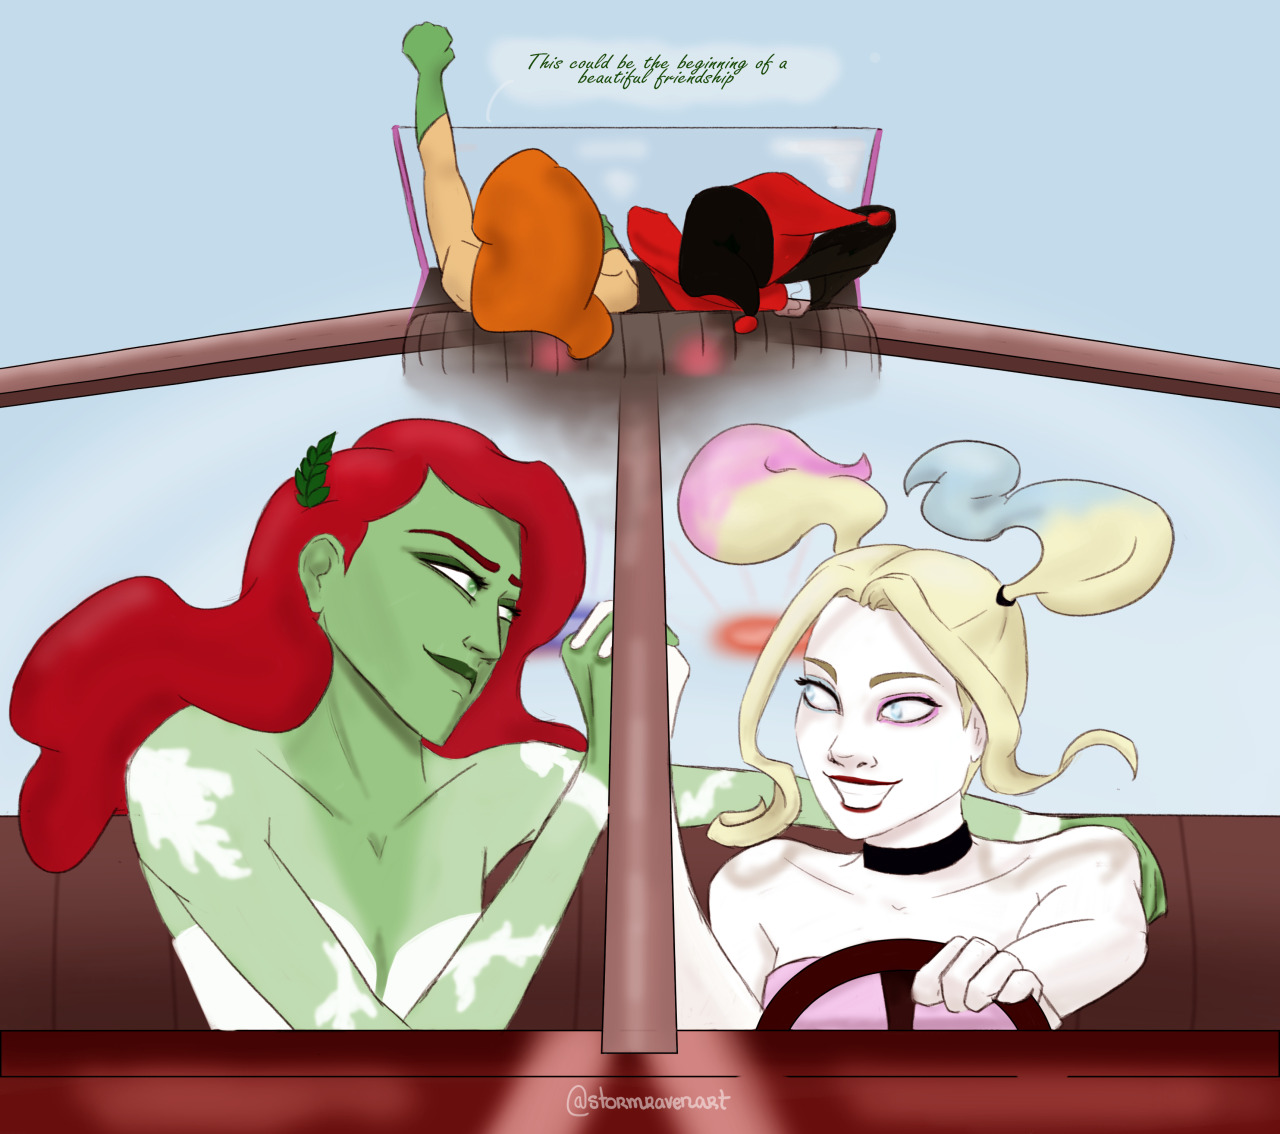 Harley/Ivy is the OTP that has owned my whole entire gay soul since I was a...